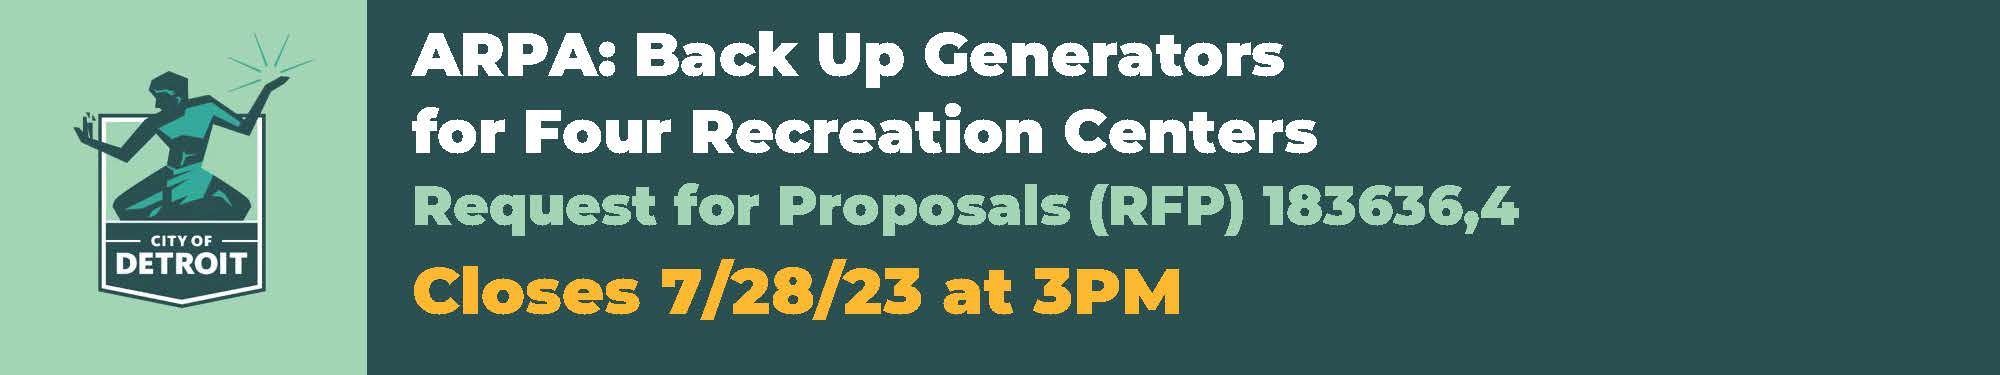 Take Part: ARPA: Back Up Generators for Four Recreation Centers